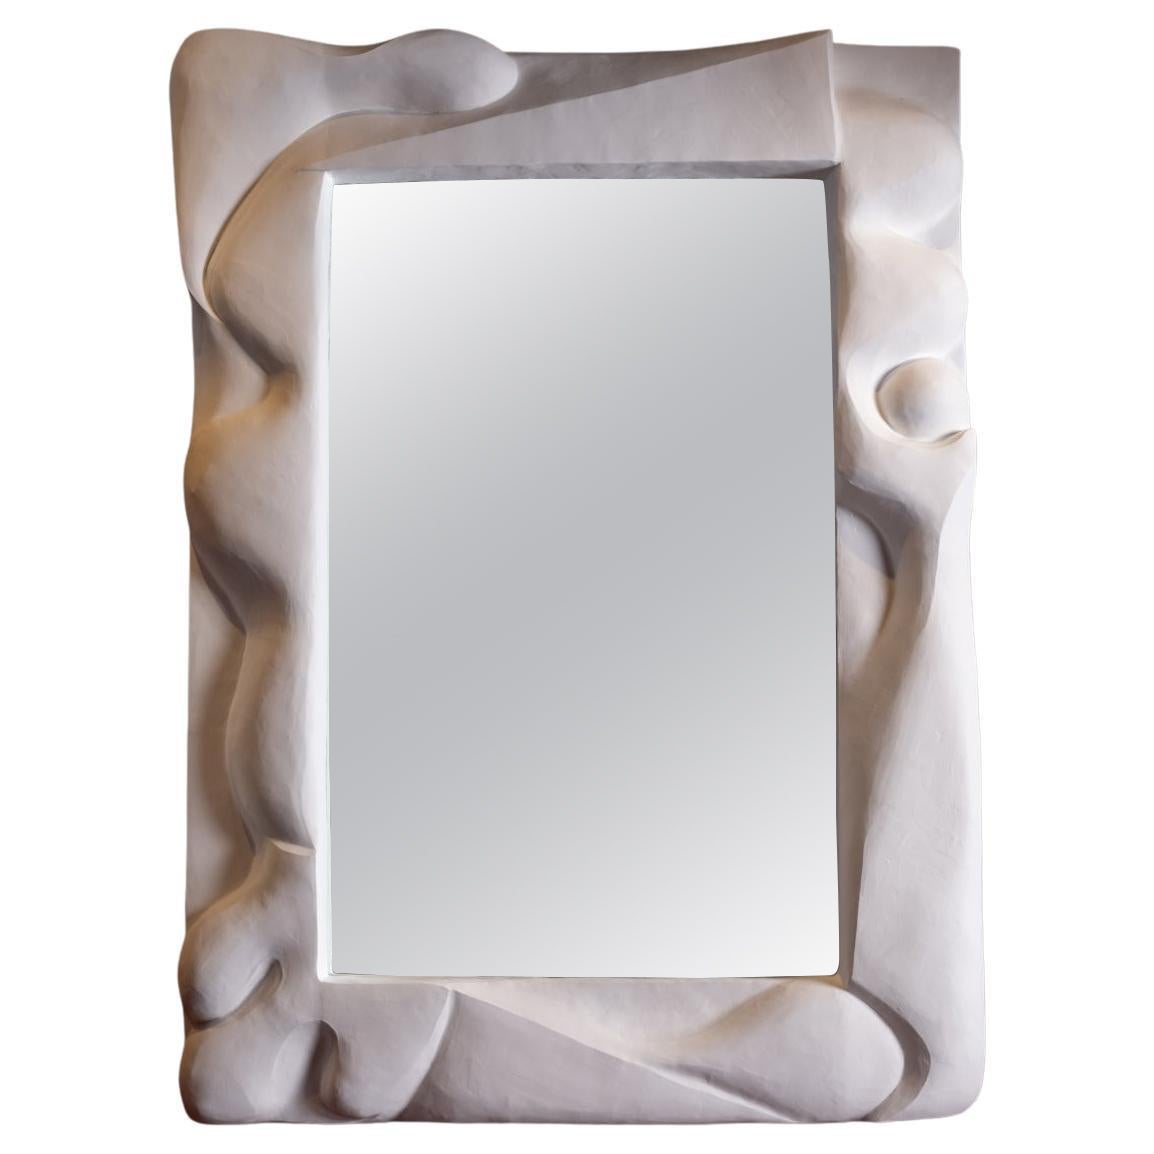 Monumental Standing/Wall Mirror with Hand-Sculpted Biomorphic Plasterwork Frame